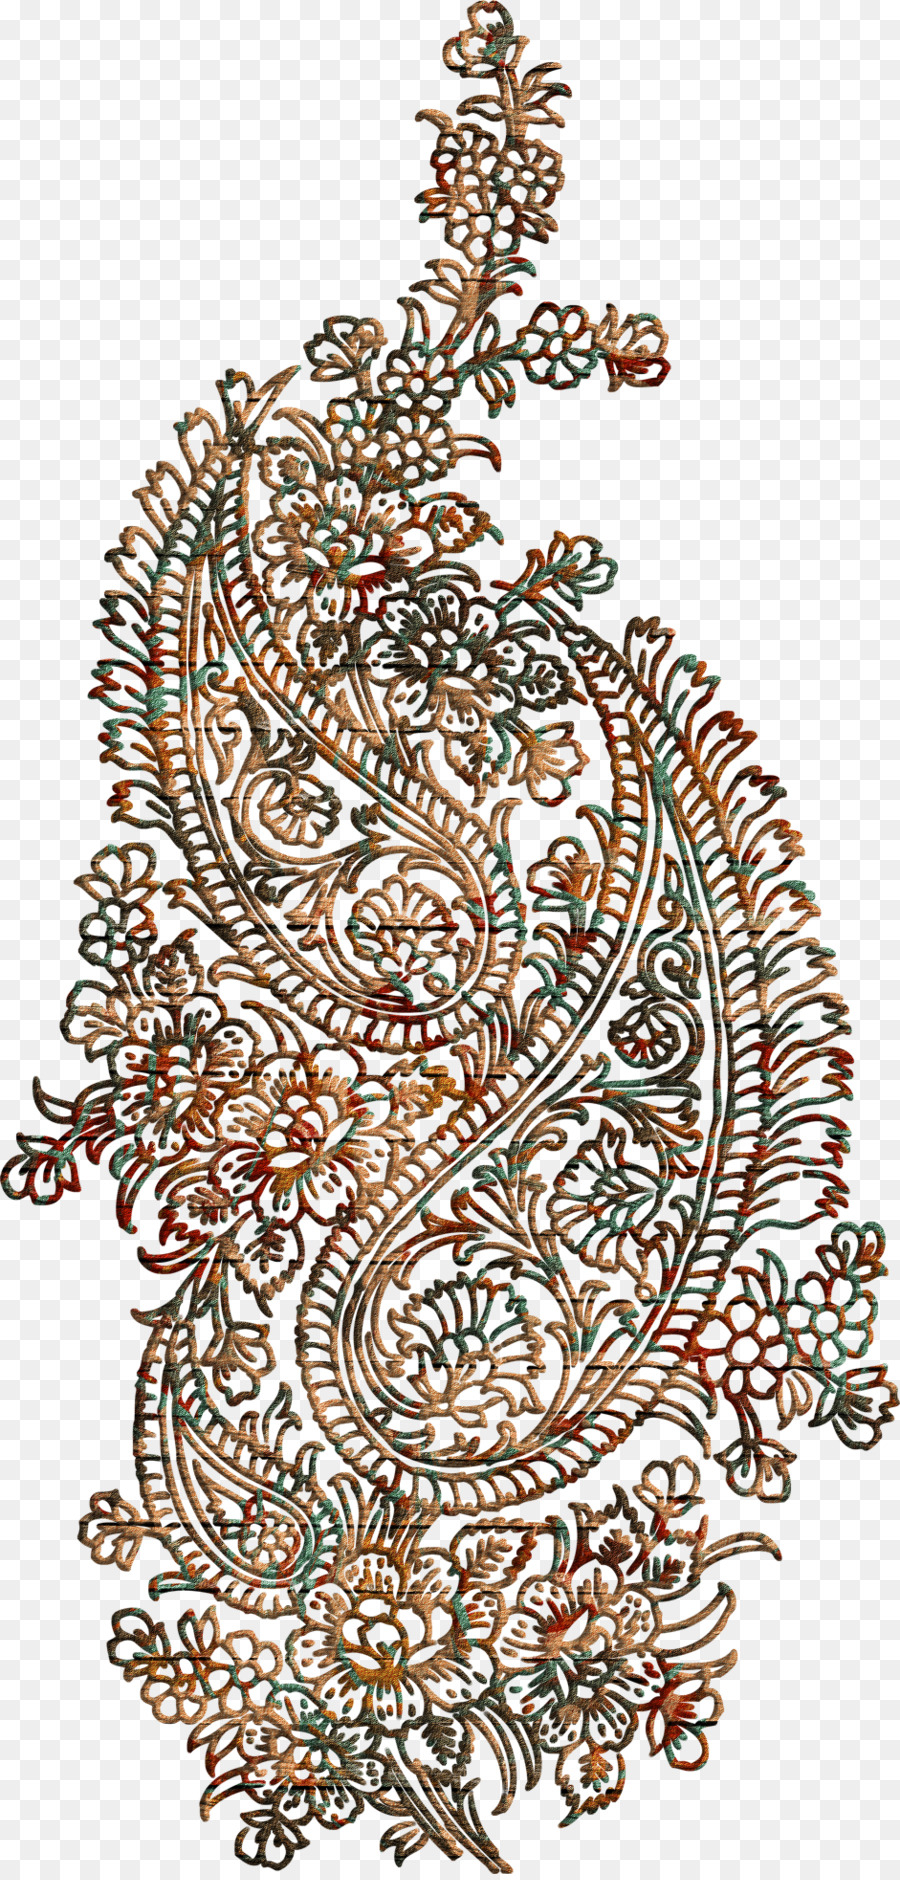 Paisley Embroidery Patterns Tree Stencil Png Download 9411959 Free Transparent Paisley Png